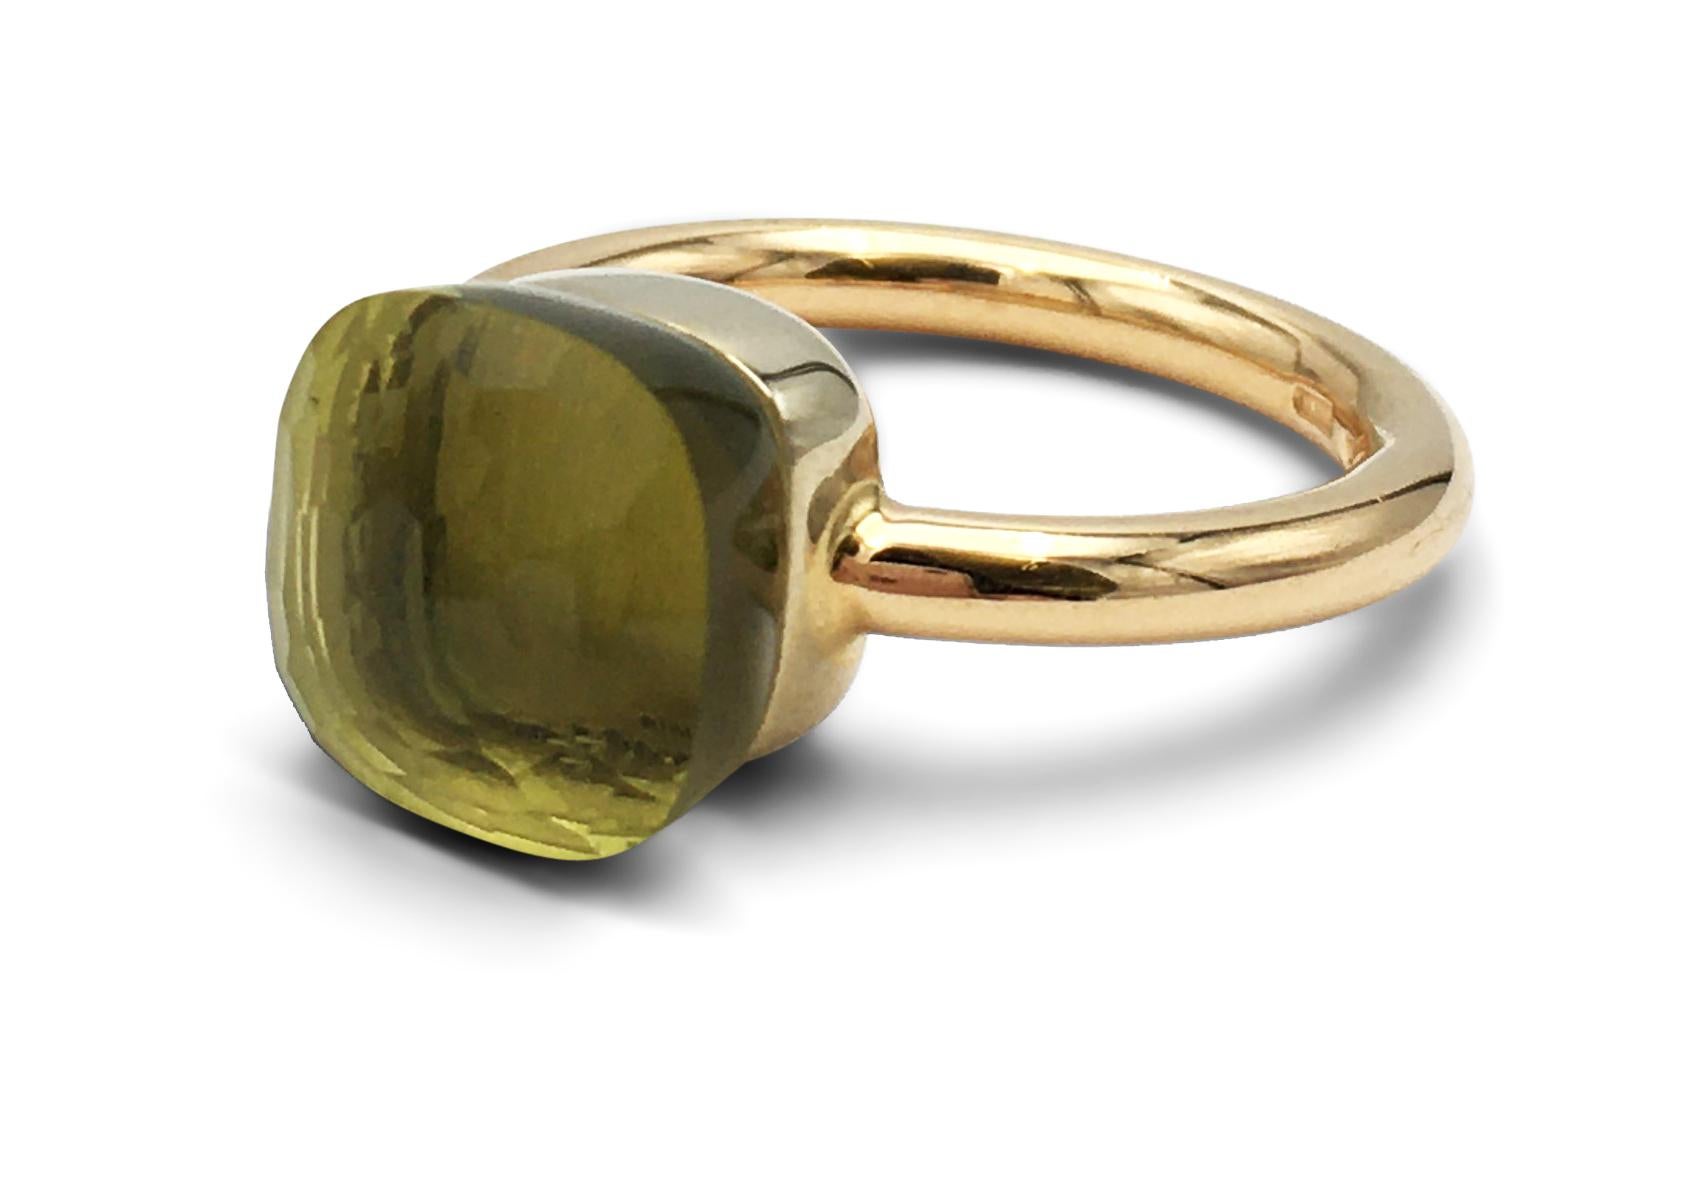 Authentic Pomellato Nudo ring crafted in 18 karat rose gold and featuring a faceted greenish-yellow peridot stone measuring 9mm x 9mm.  Signed Pomellato.  Ring size 7.  Not presented with original box or papers. CIRCA 2010s